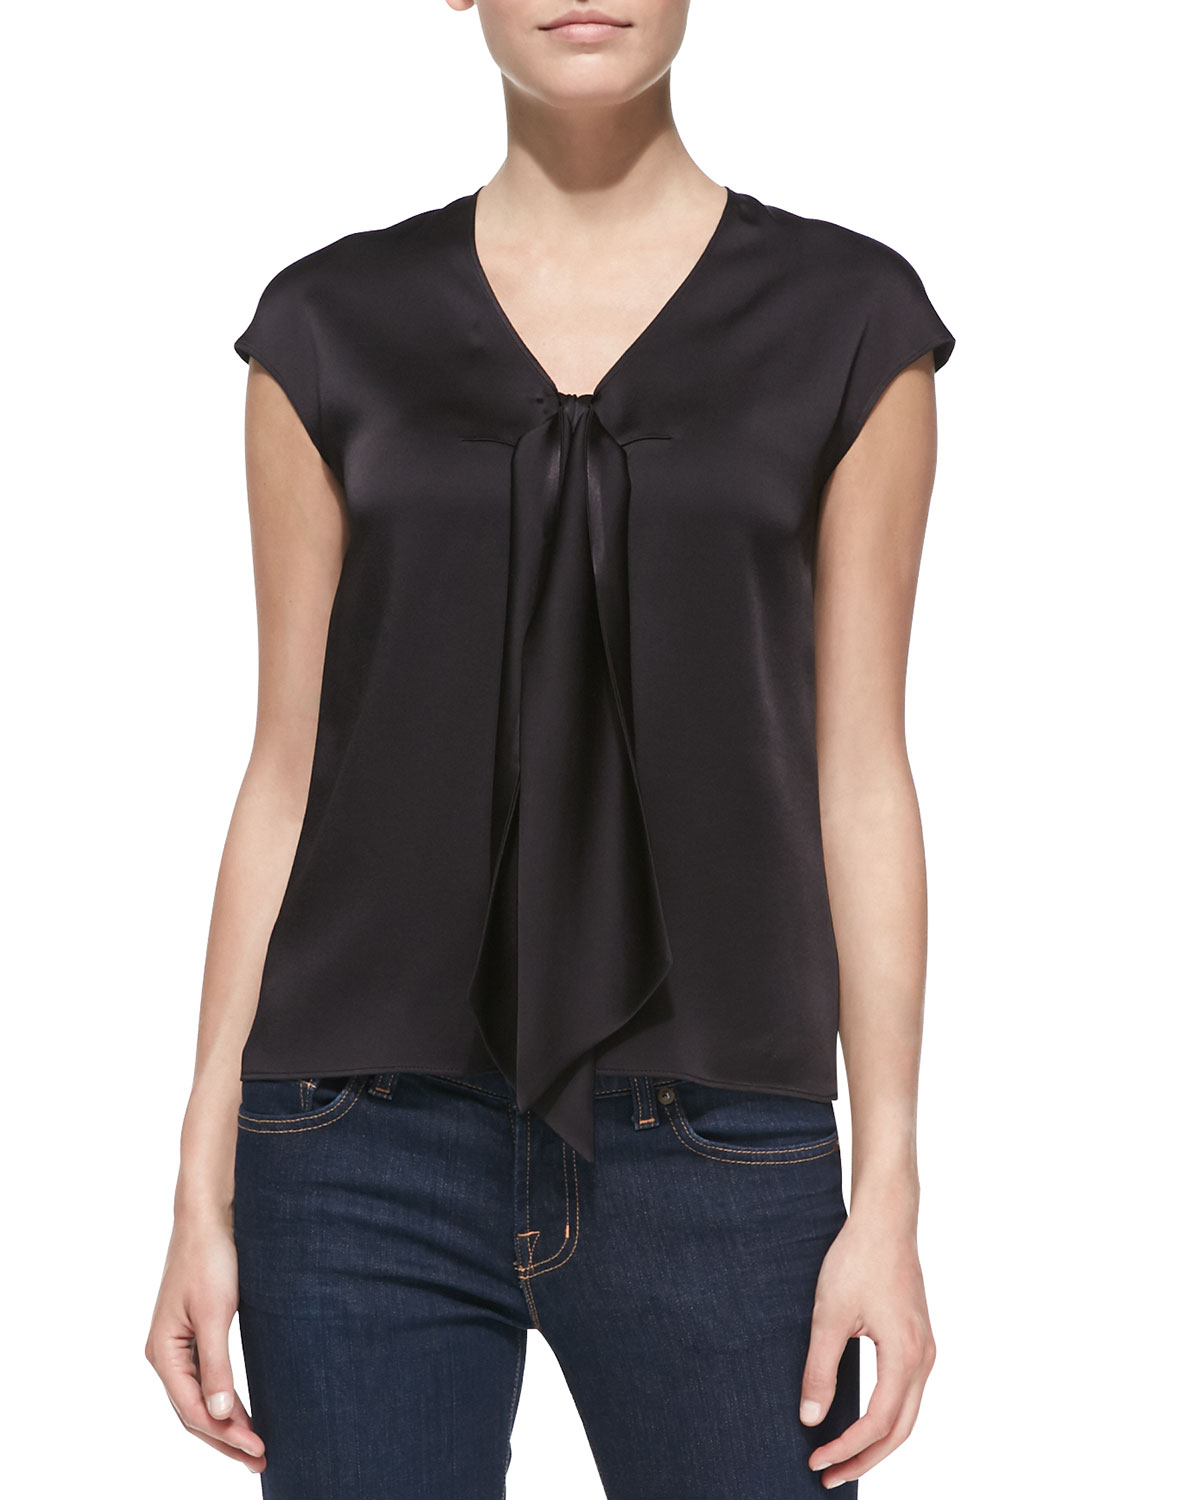 Michael kors Sleeveless Tie-Front Charmeuse Top in Black | Lyst